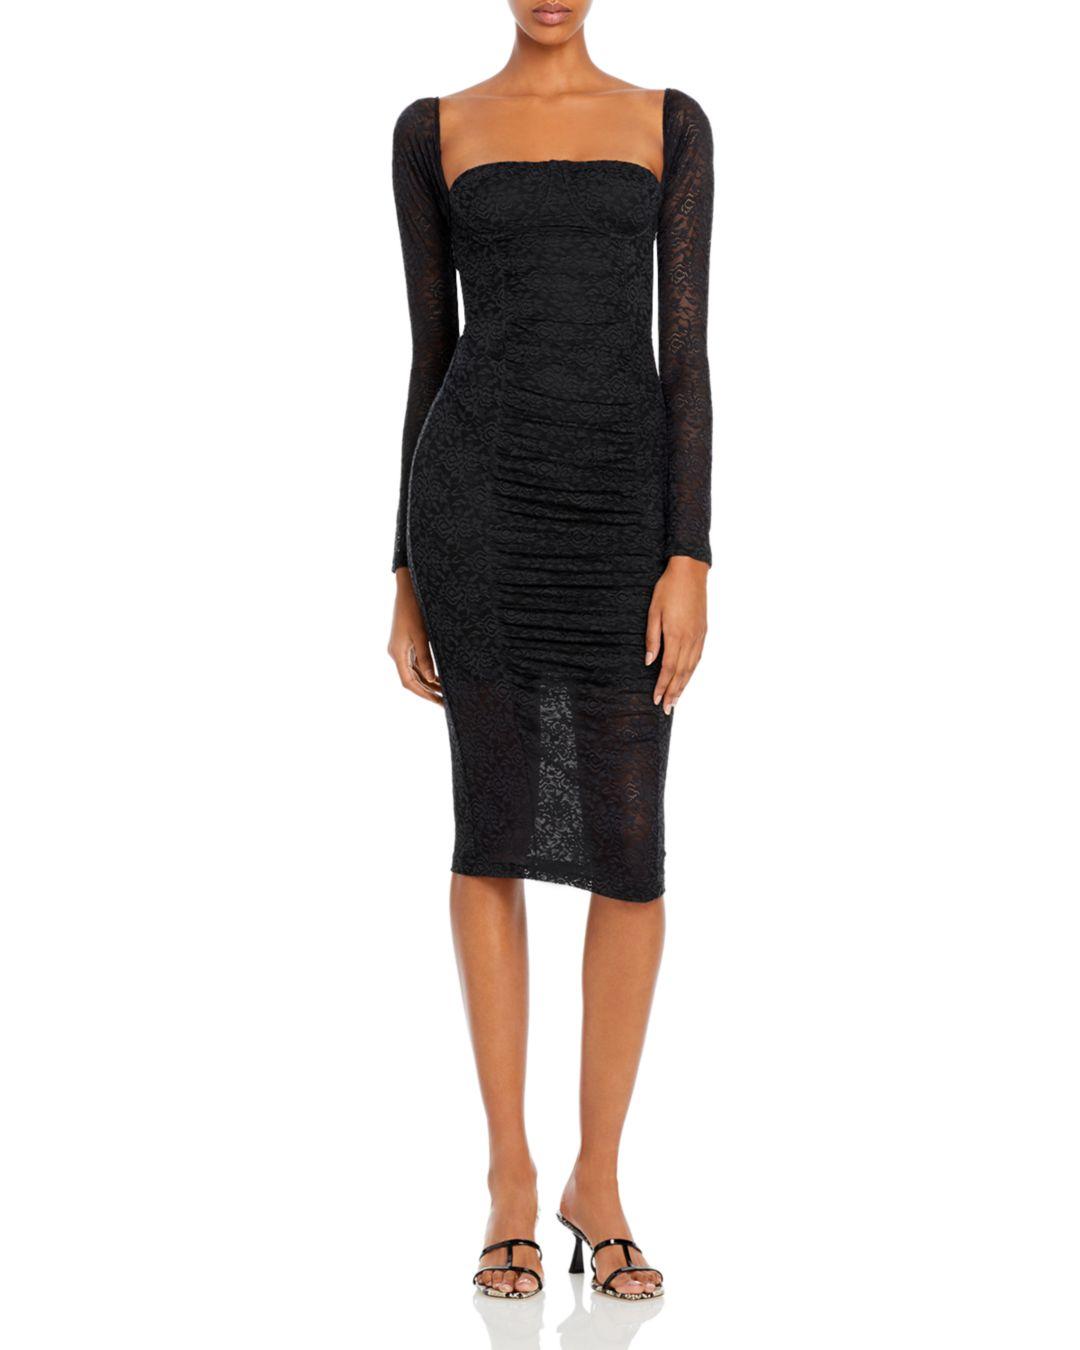 Jonathan Simkhai Standard Ruched Long Sleeve Lace Dress in Black - Lyst